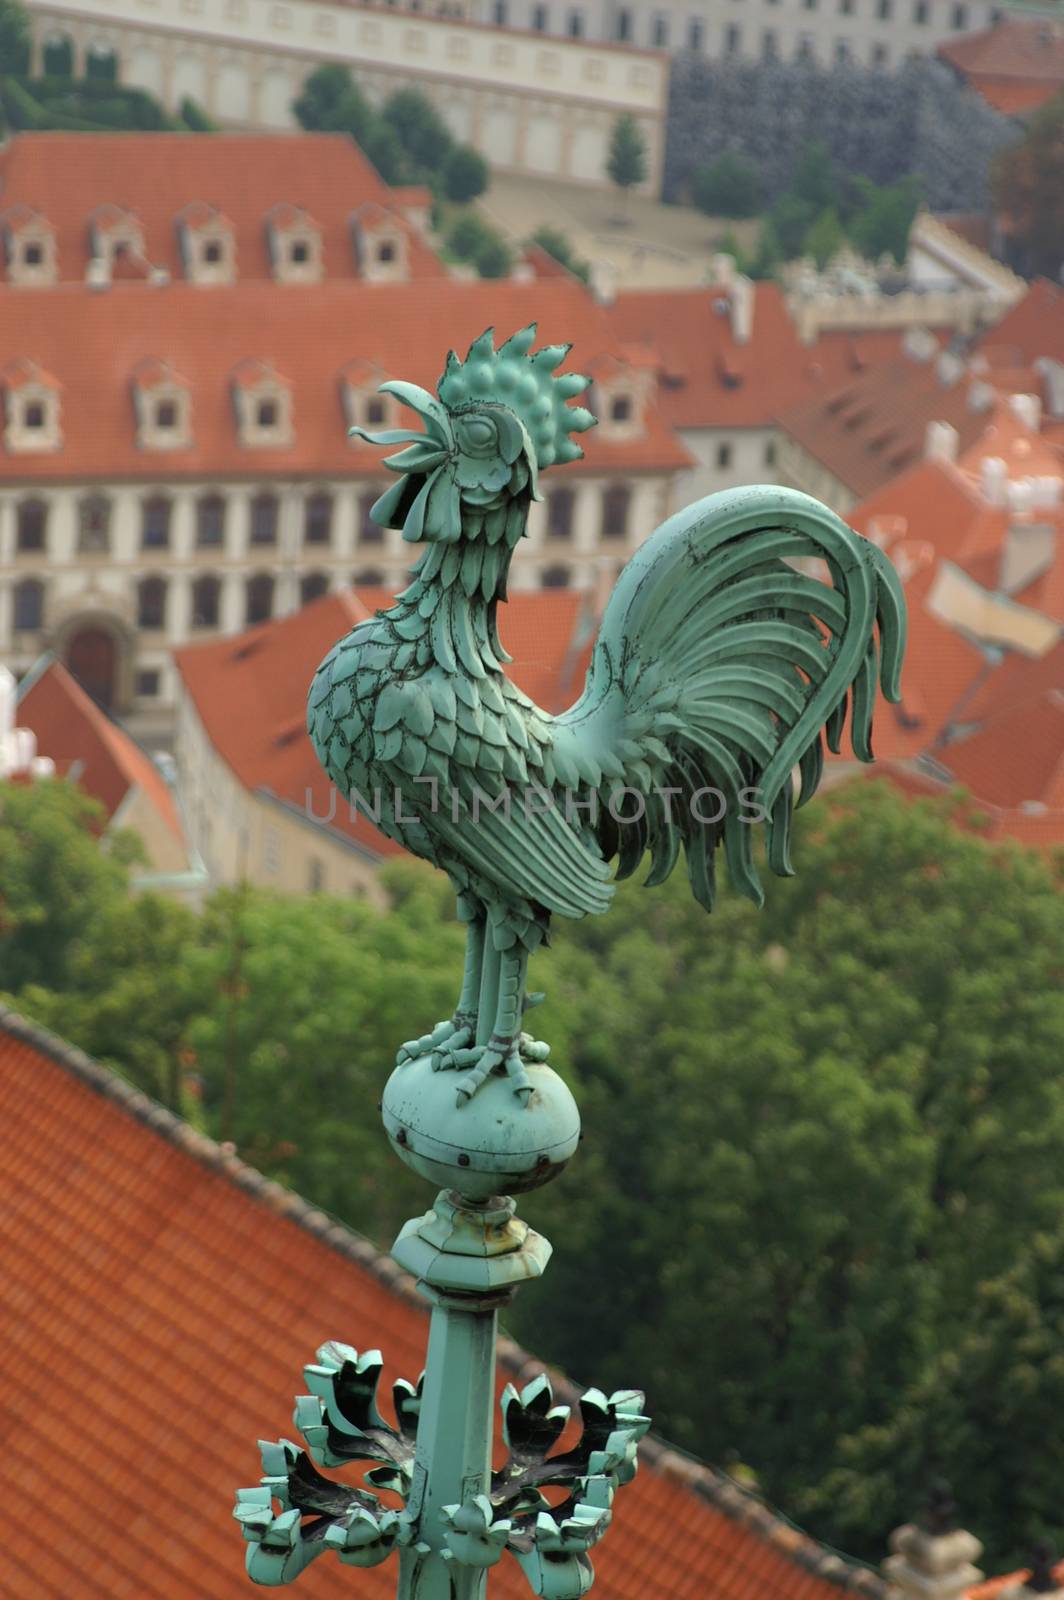 Roofs of prague houses and cock on a church tower